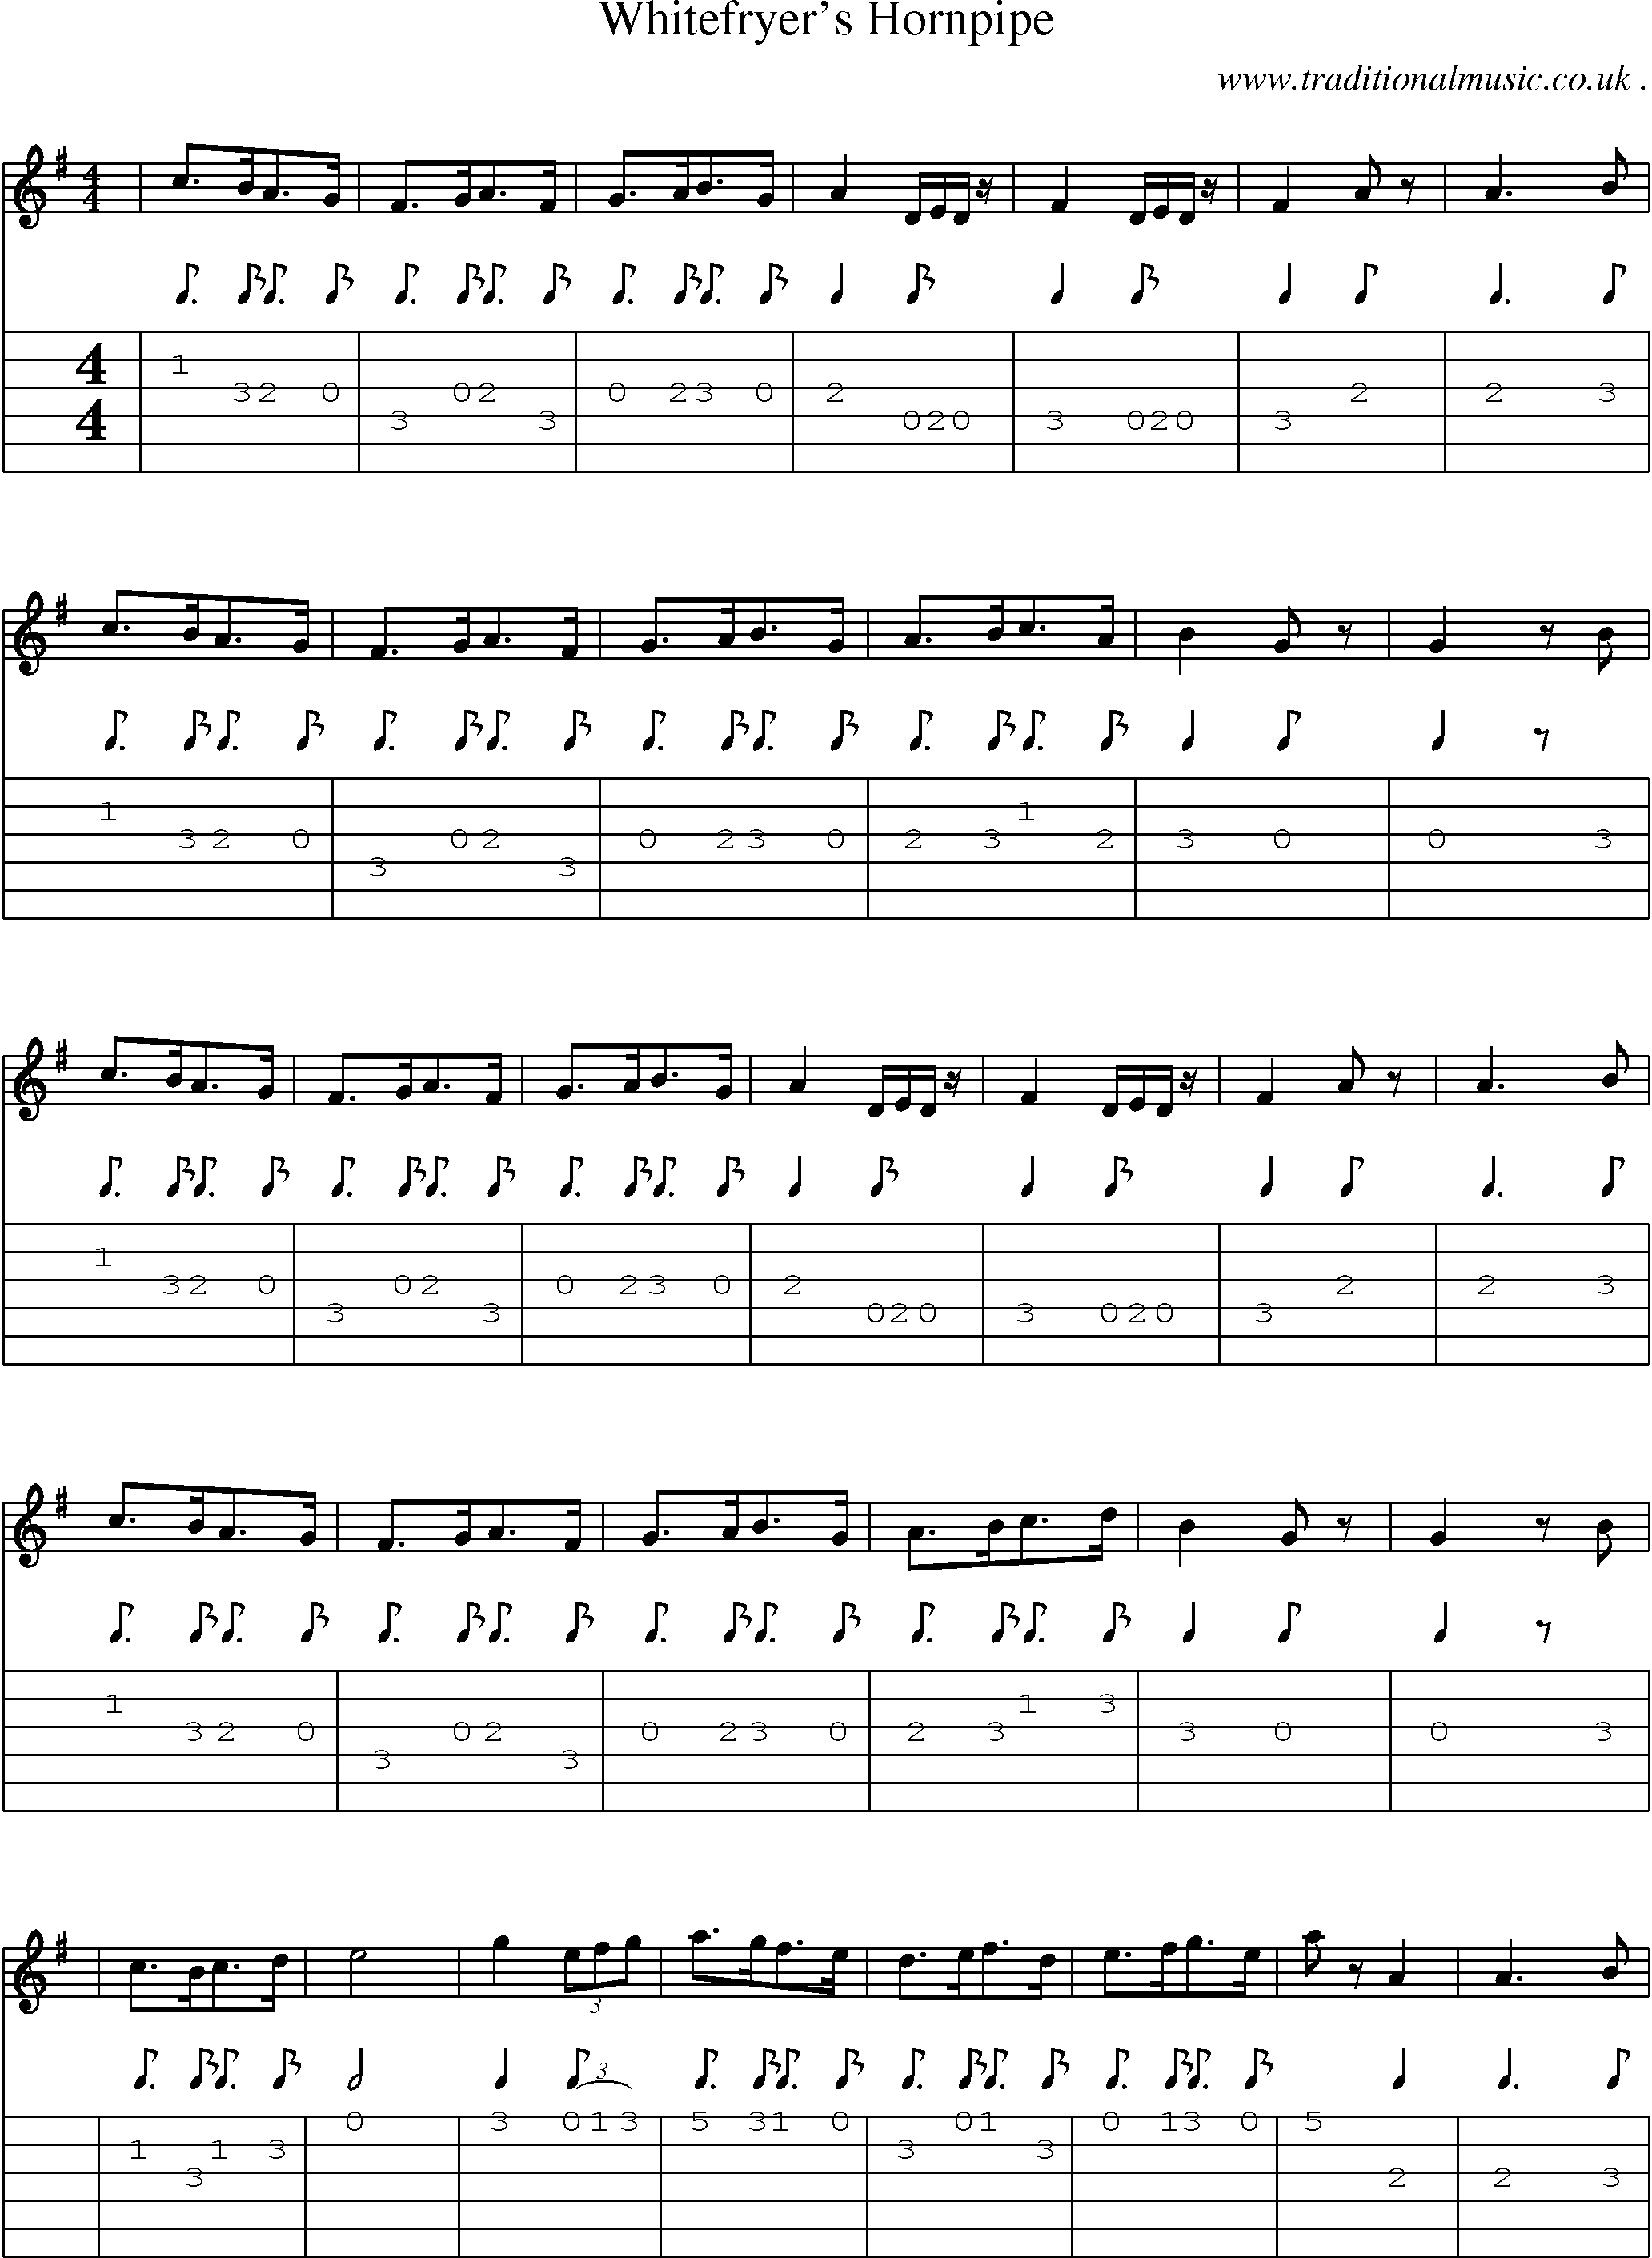 Sheet-Music and Guitar Tabs for Whitefryers Hornpipe